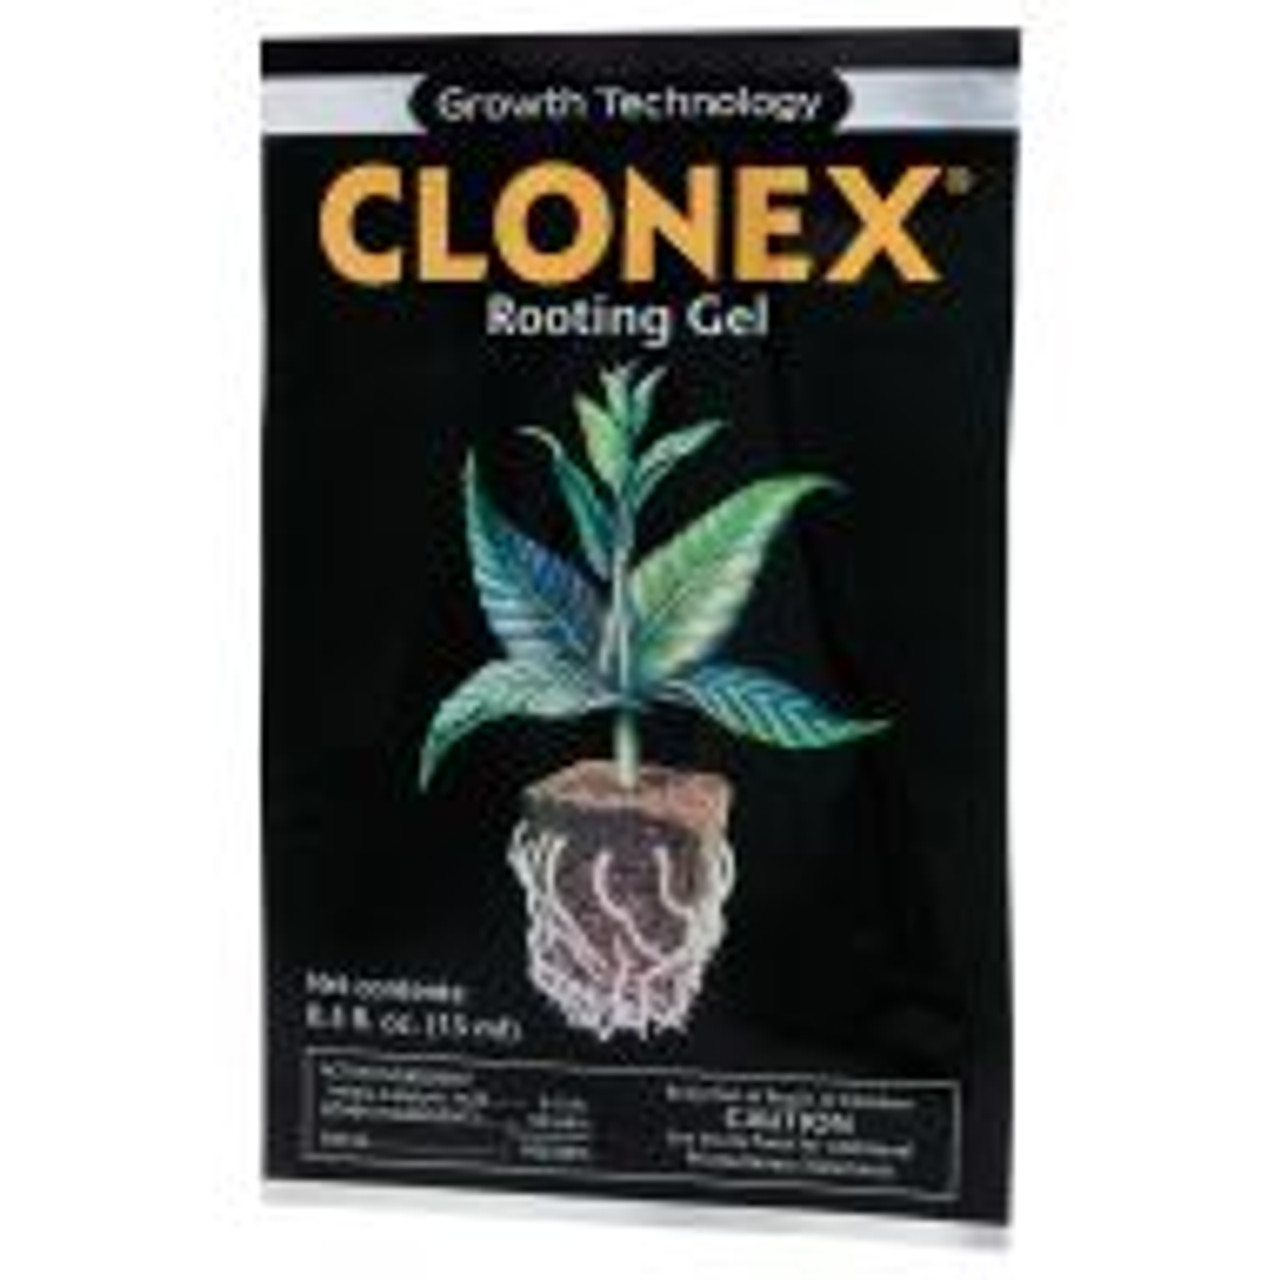 Tried-and-true Clonex Rooting Compound now comes in handy 15-mL sachets! The single-use packaging is easy on the pocketbook and keeps the high-performance formulation of 3-indolebutyric acid and vitamin B-1 fresh until time of use. Each packet clearly details usage instructions. Clonex Rooting Gel is registered with the EPA and approved for use on all plants, including food crops, in all 50 states plus Washington DC and Puerto Rico!